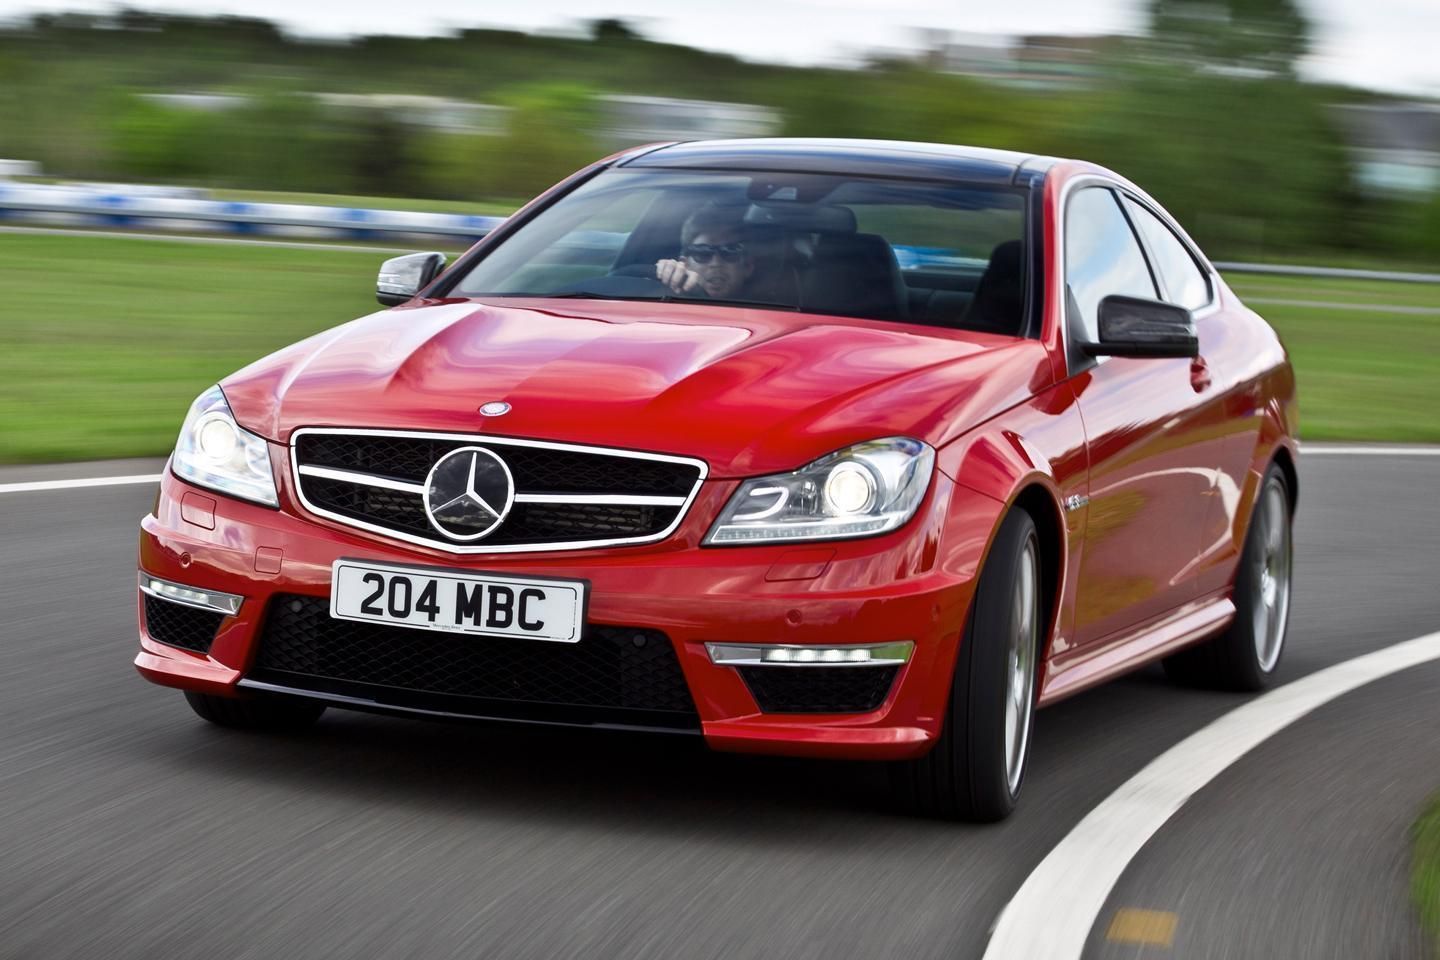 Mercedes Benz W204 C 63 AMG Coupe - If you were to buy a Mercedes, which  model would you choose? : r/ForzaHorizon